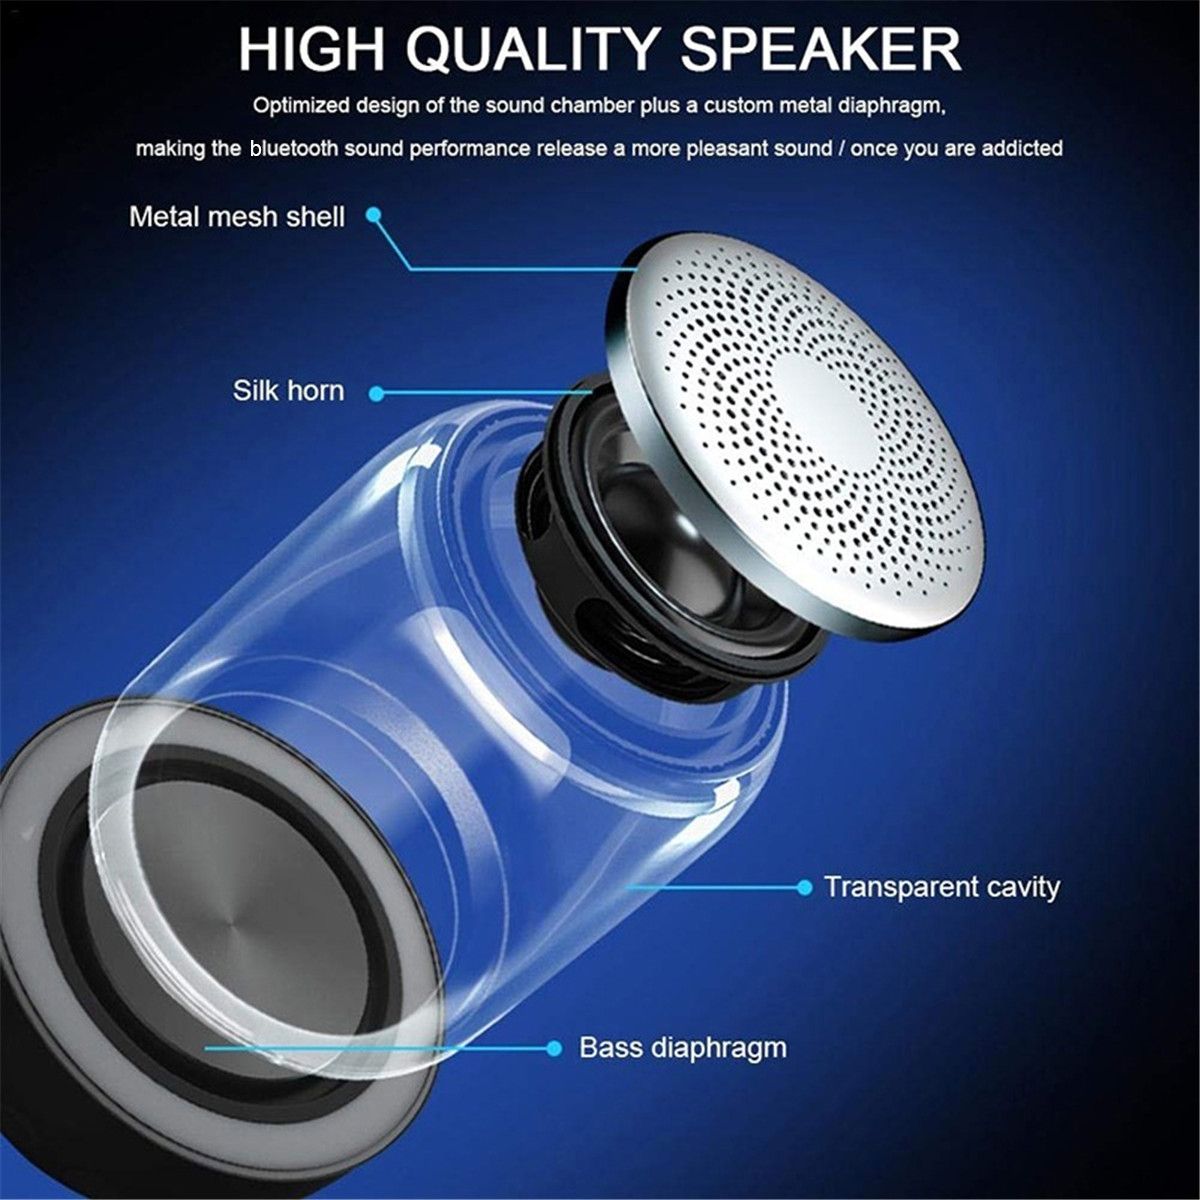 Wireless-Stereo-Speaker-with-Transparent-Design-Breathing-LED-Light-bluetooth-50-TF-Card--AUX-Audio--1568344